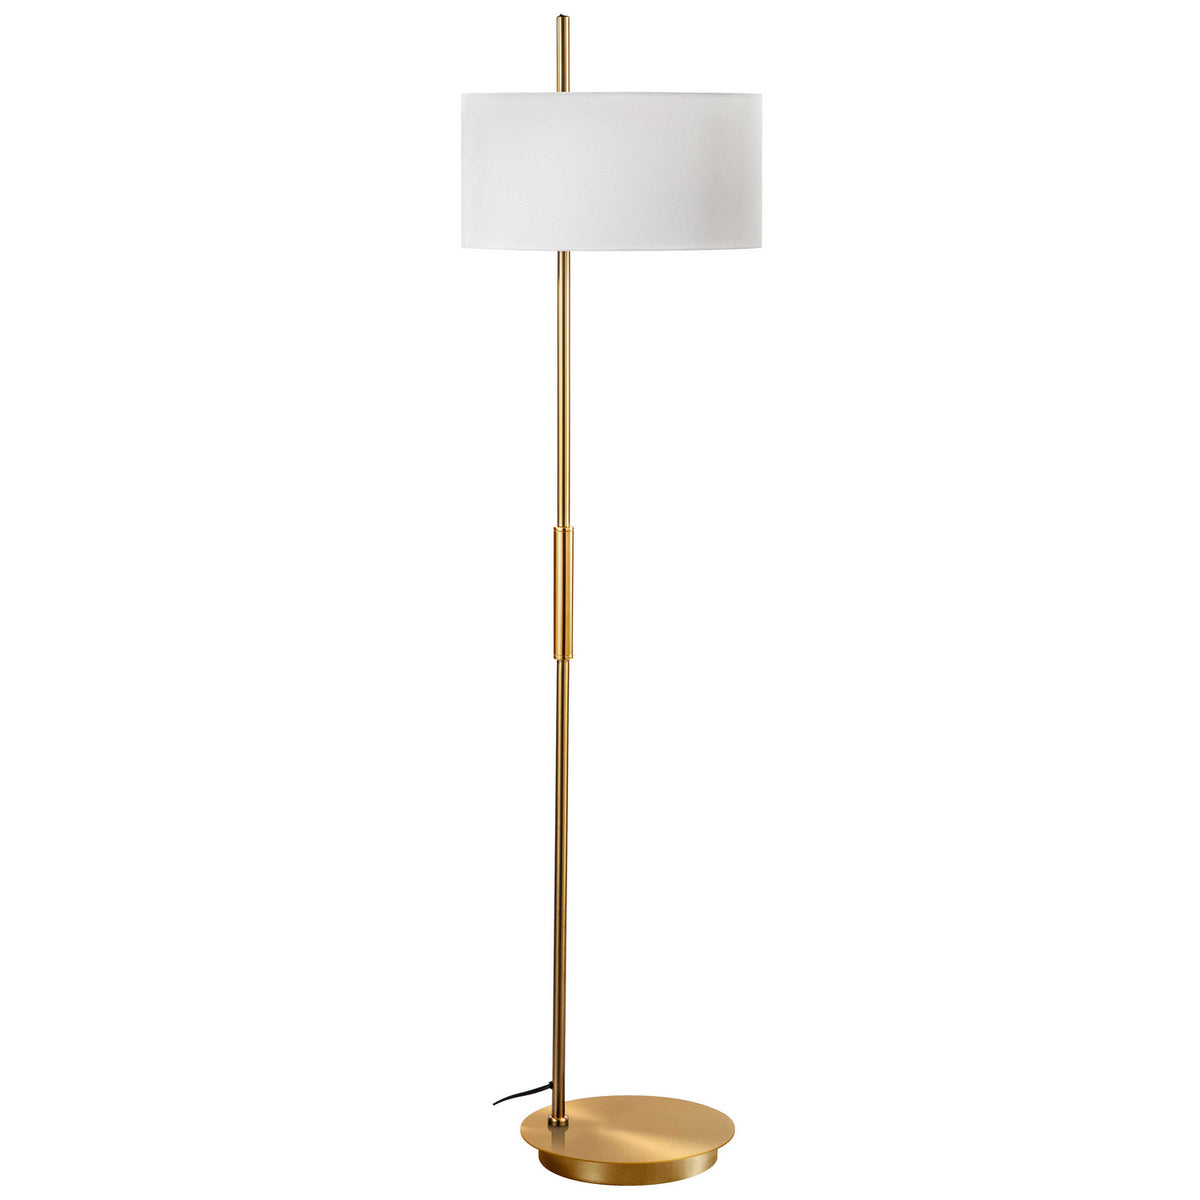 Dainolite Canada - FTG-622F-AGB-WH - One Light Floor Lamp - Fitzgerald - Aged Brass